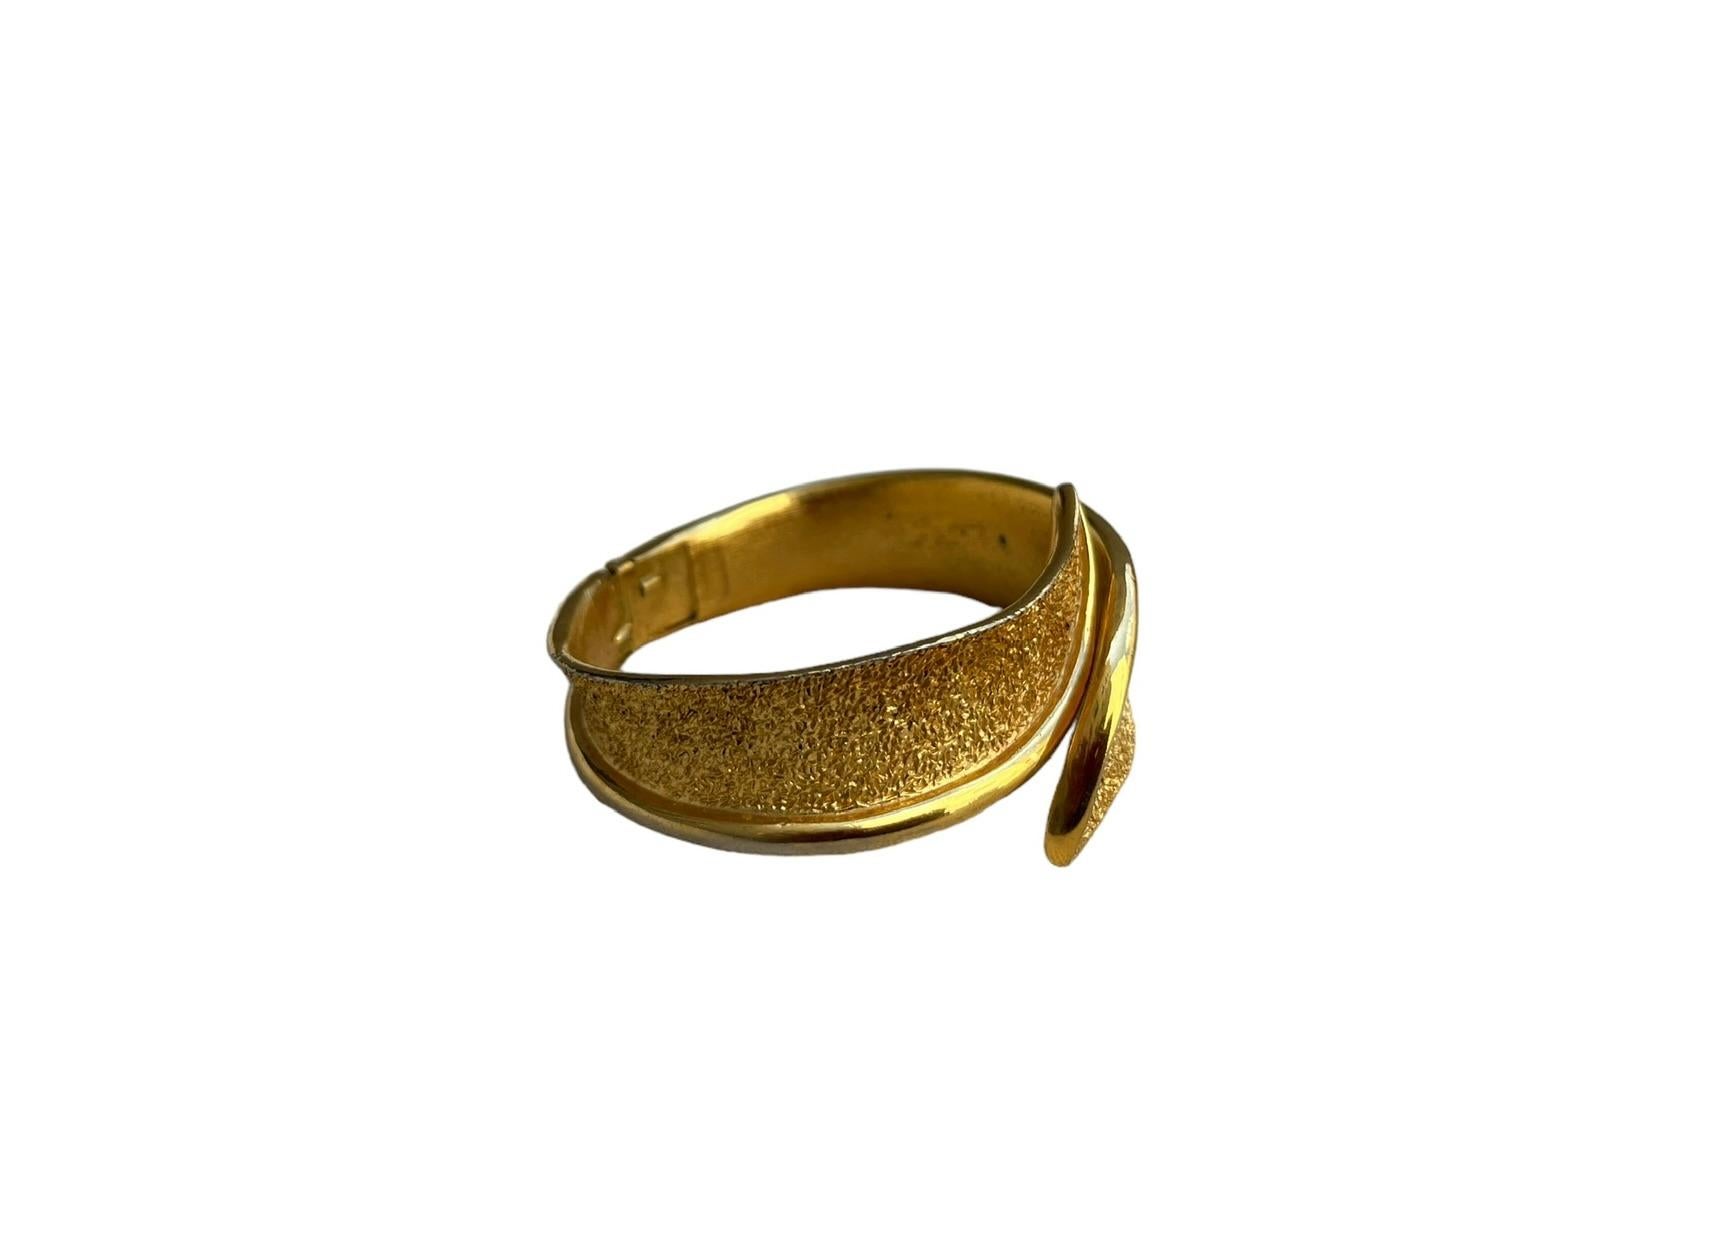 1950s Crown Trifari clamper bracelet.
Textured gold trifanium bracelet with sleek rimmed edges.
Interior side is just as gorgeous in brushed gold
A beautiful curved design
This bracelet is ideal for a small wrist; my wrist is 5 3/4 and the bracelet